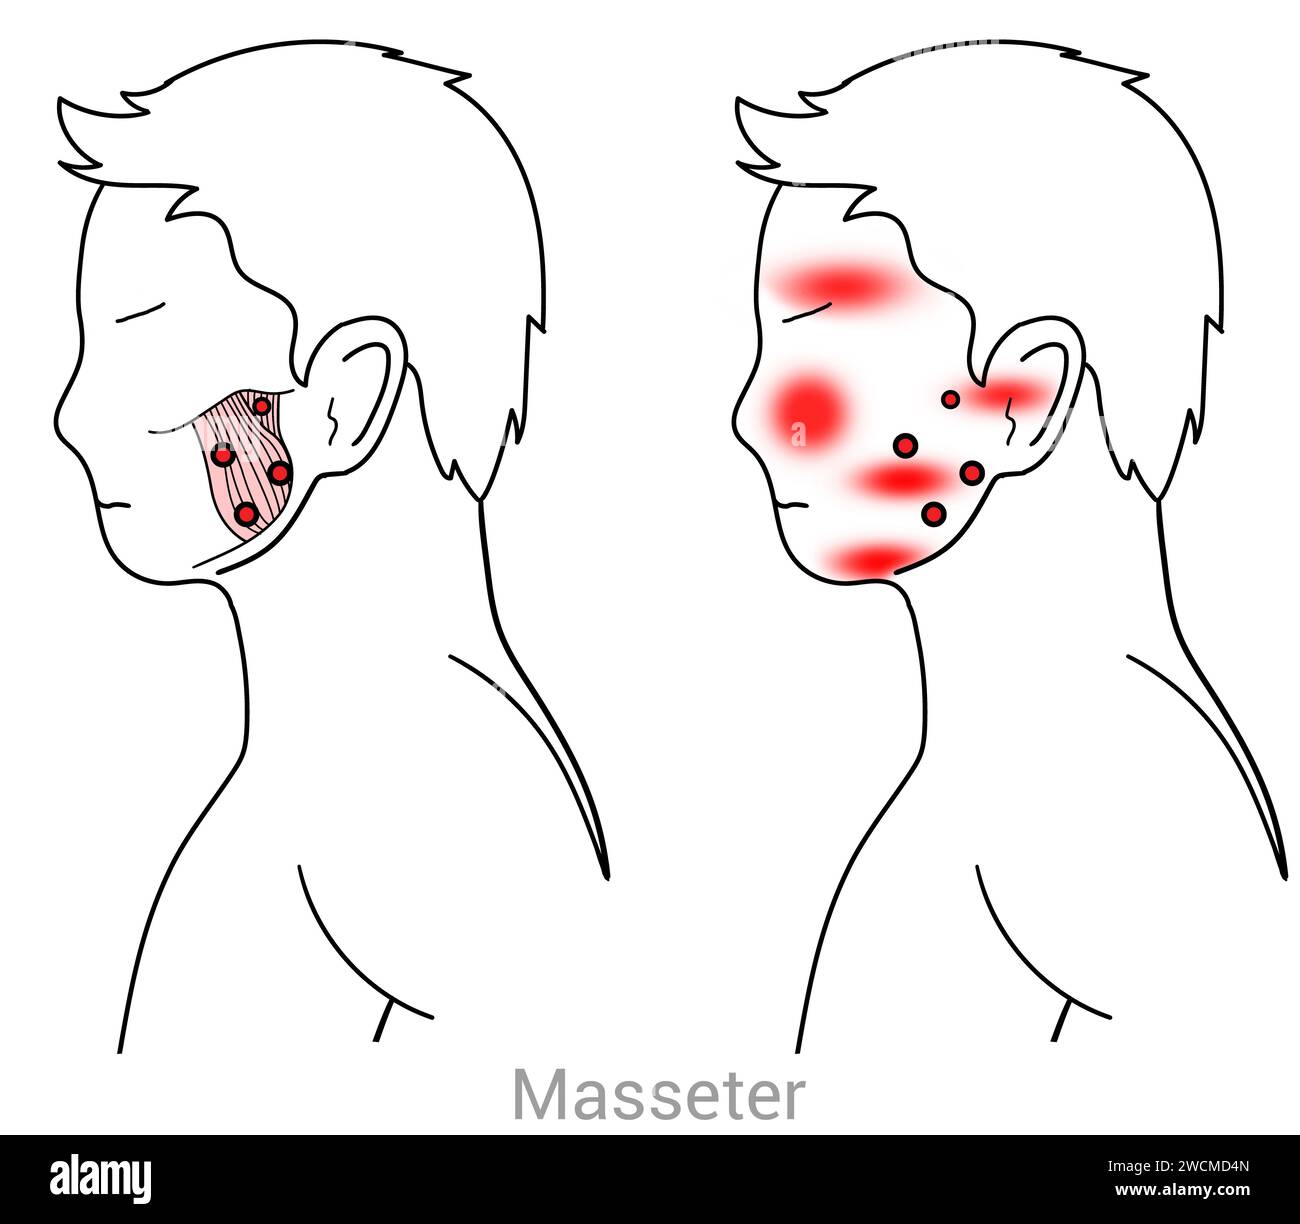 Masseter: Myofascial trigger points and associated pain locations Stock Photo